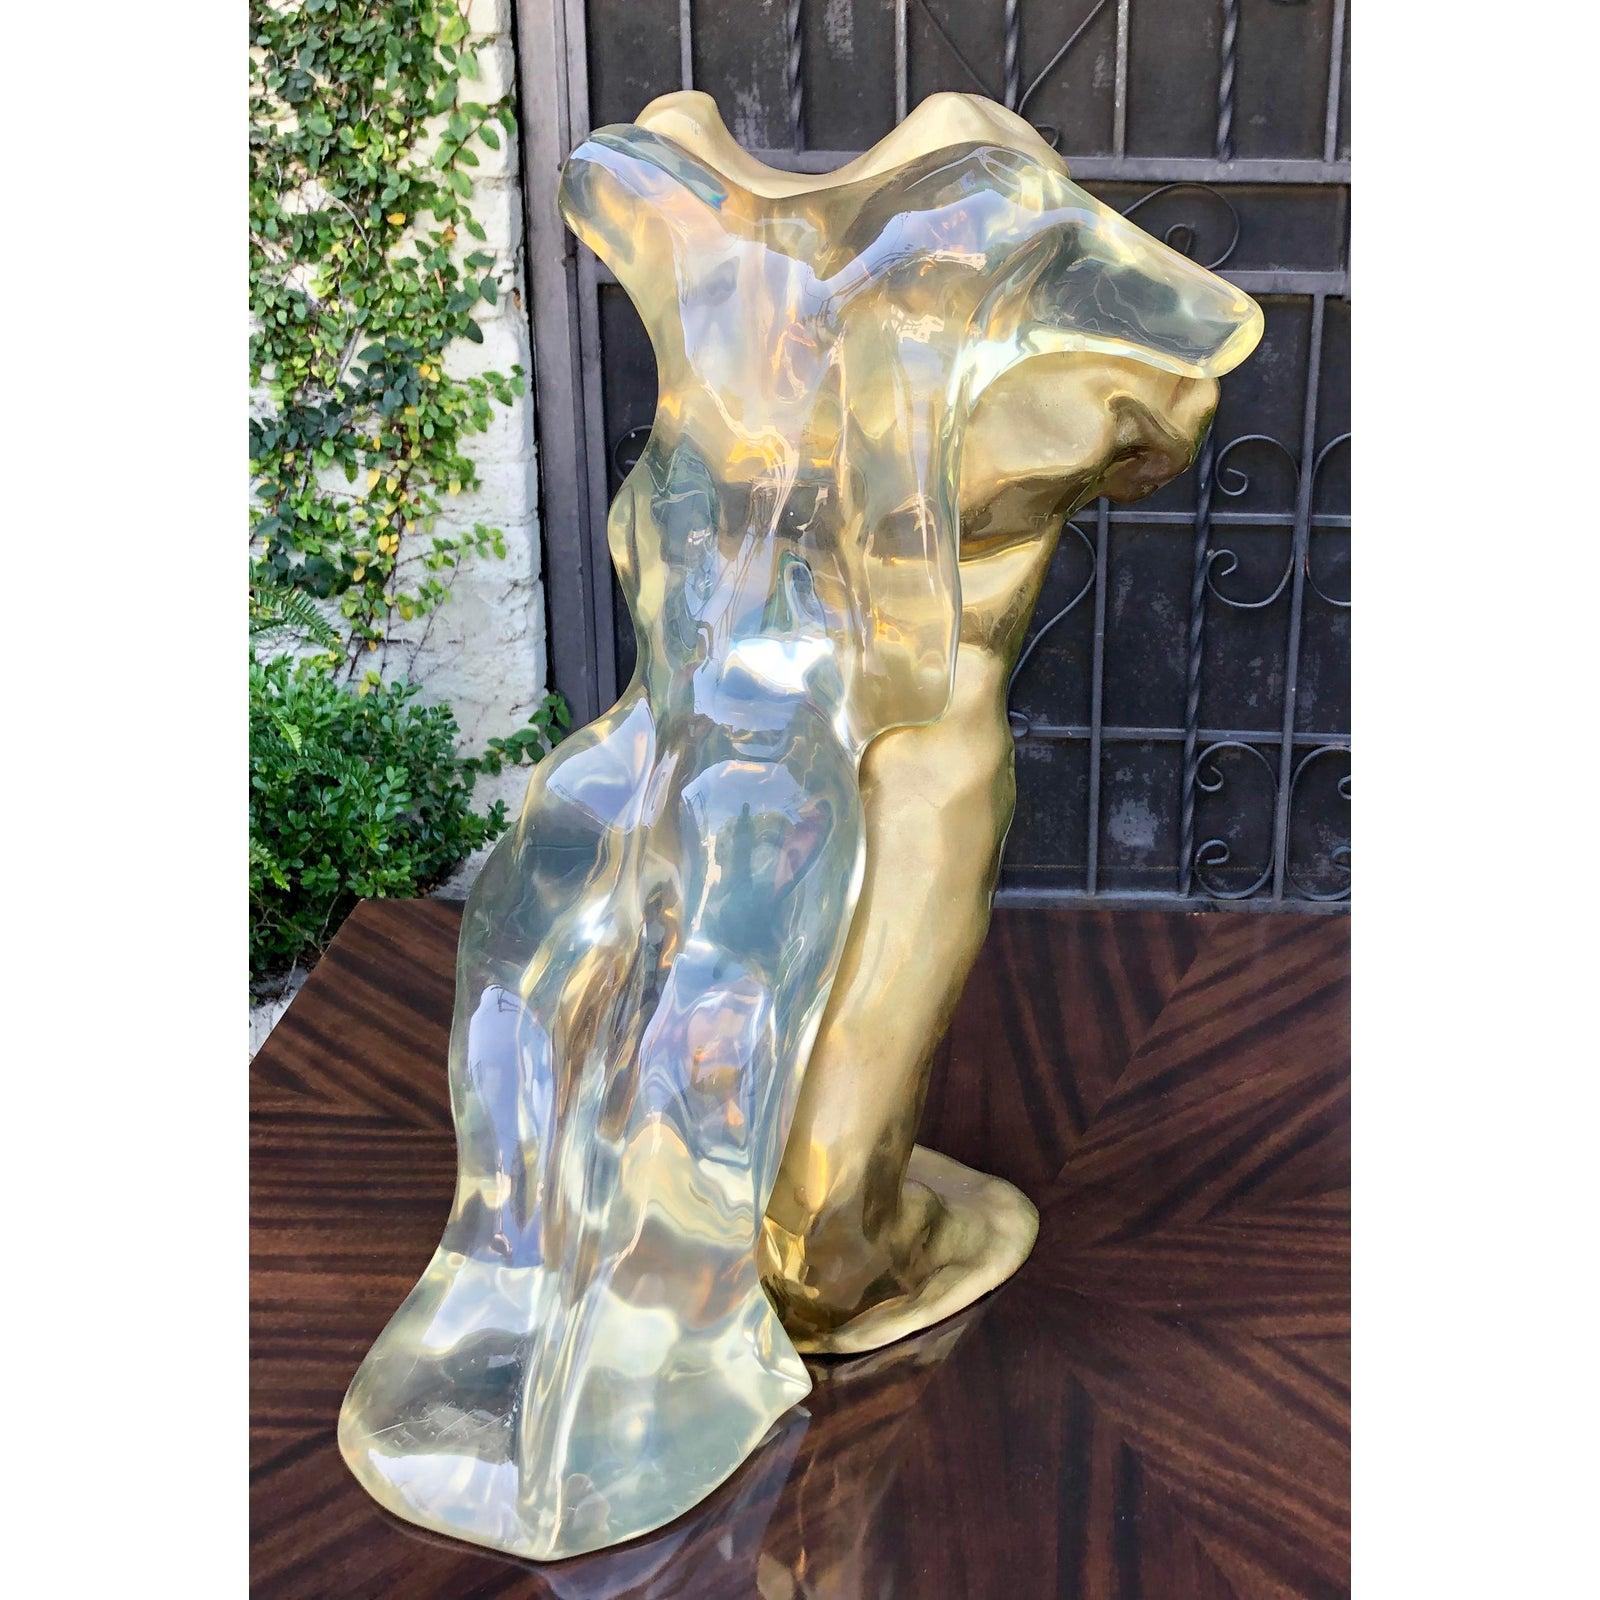 Rare signed Max Forti bronze & Lucite nude sculpture. Numbered 1 of a limited of only 6 ever made. The Lucile female nude is removable which one of the artist’s trademark techniques.